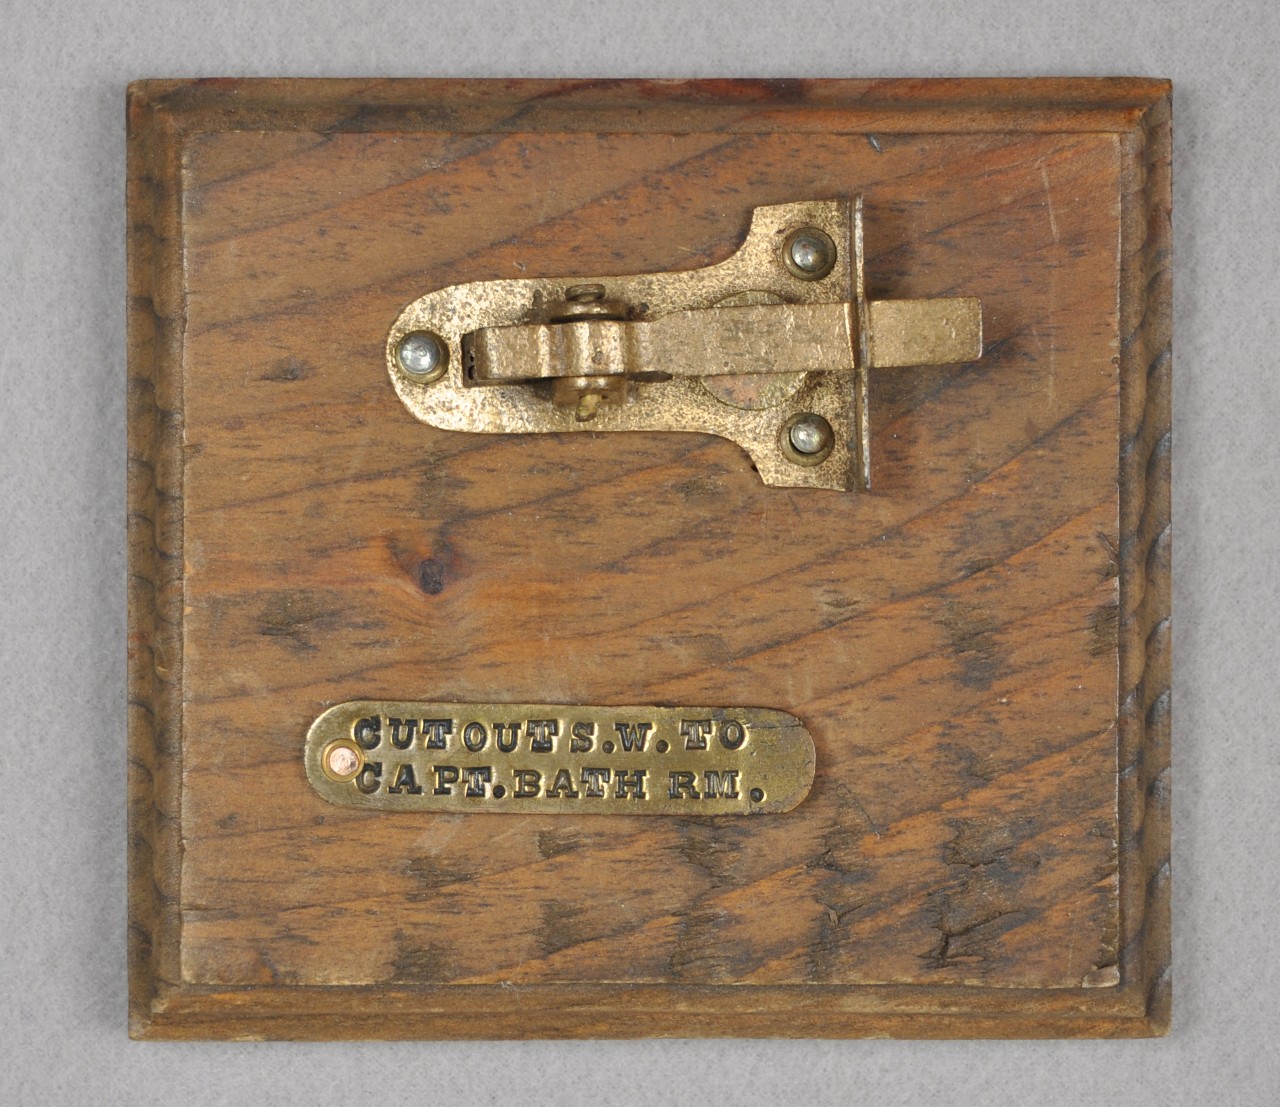 <p>Attached to a square wooden piece of wood is a brass cabinet latch and below the latch is an oblong brass tag with the woods “Cut Out S.W. To Capt. Bath Rm.” stamped on it.</p>